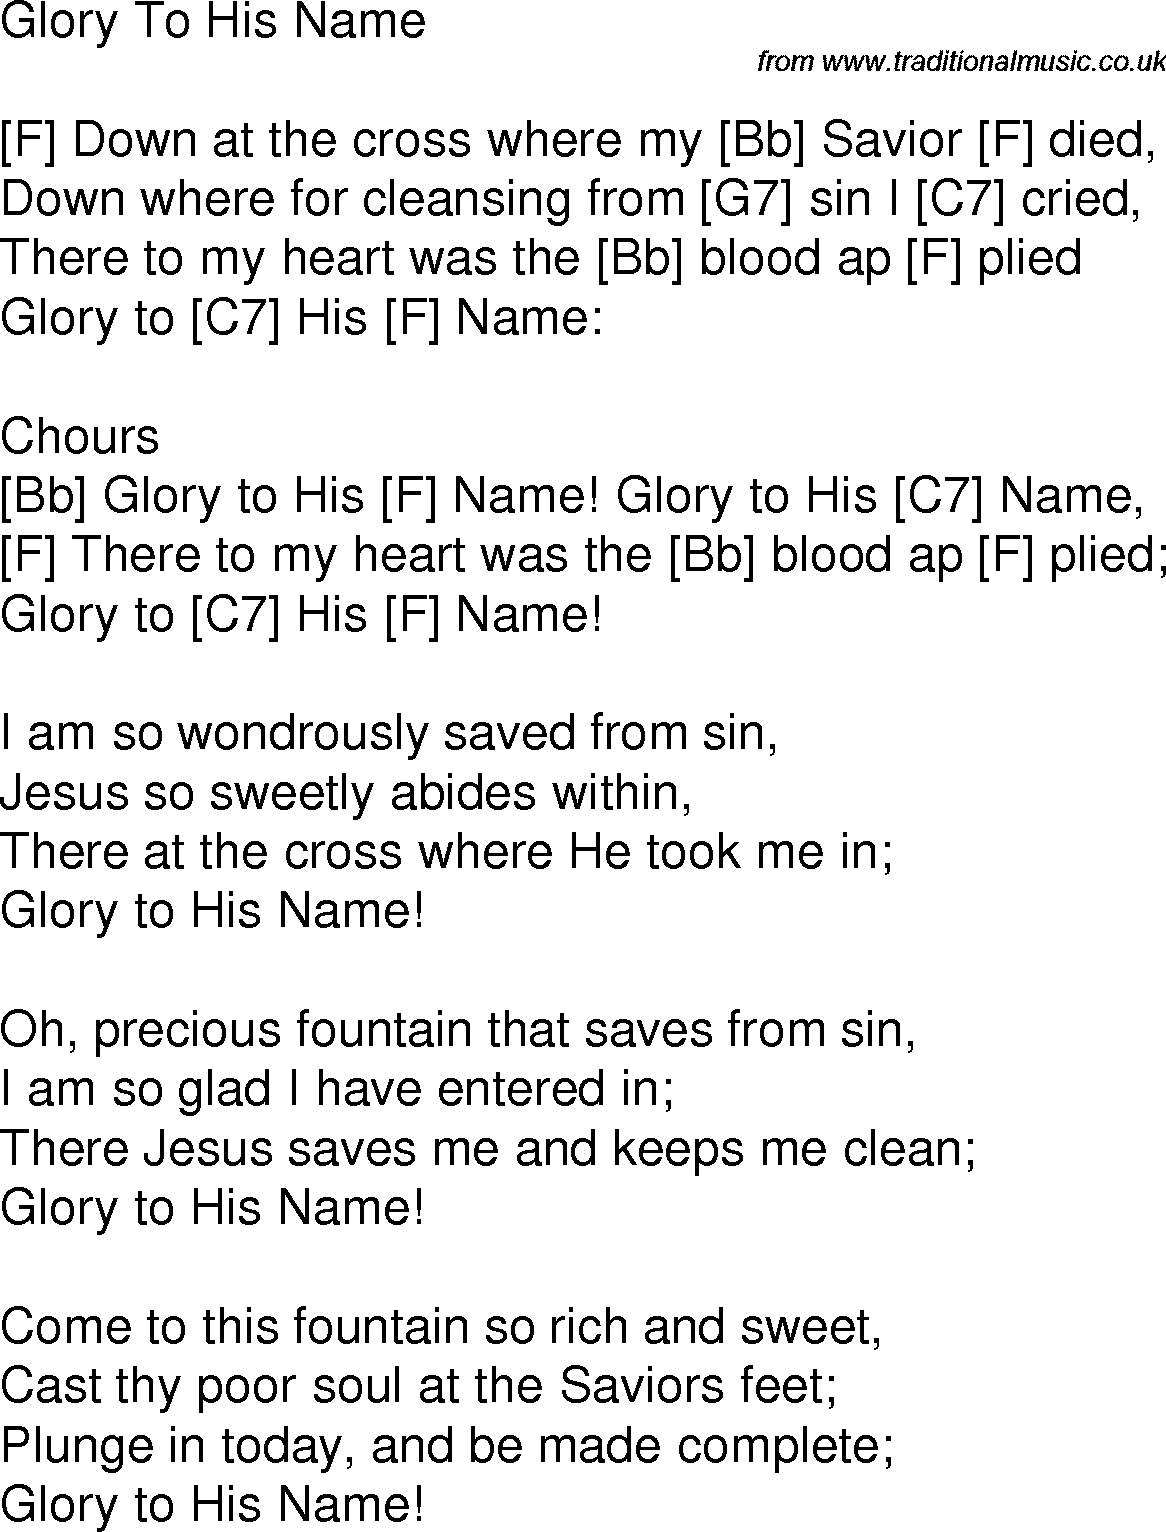 Old time song lyrics with chords for Glory To His Name F